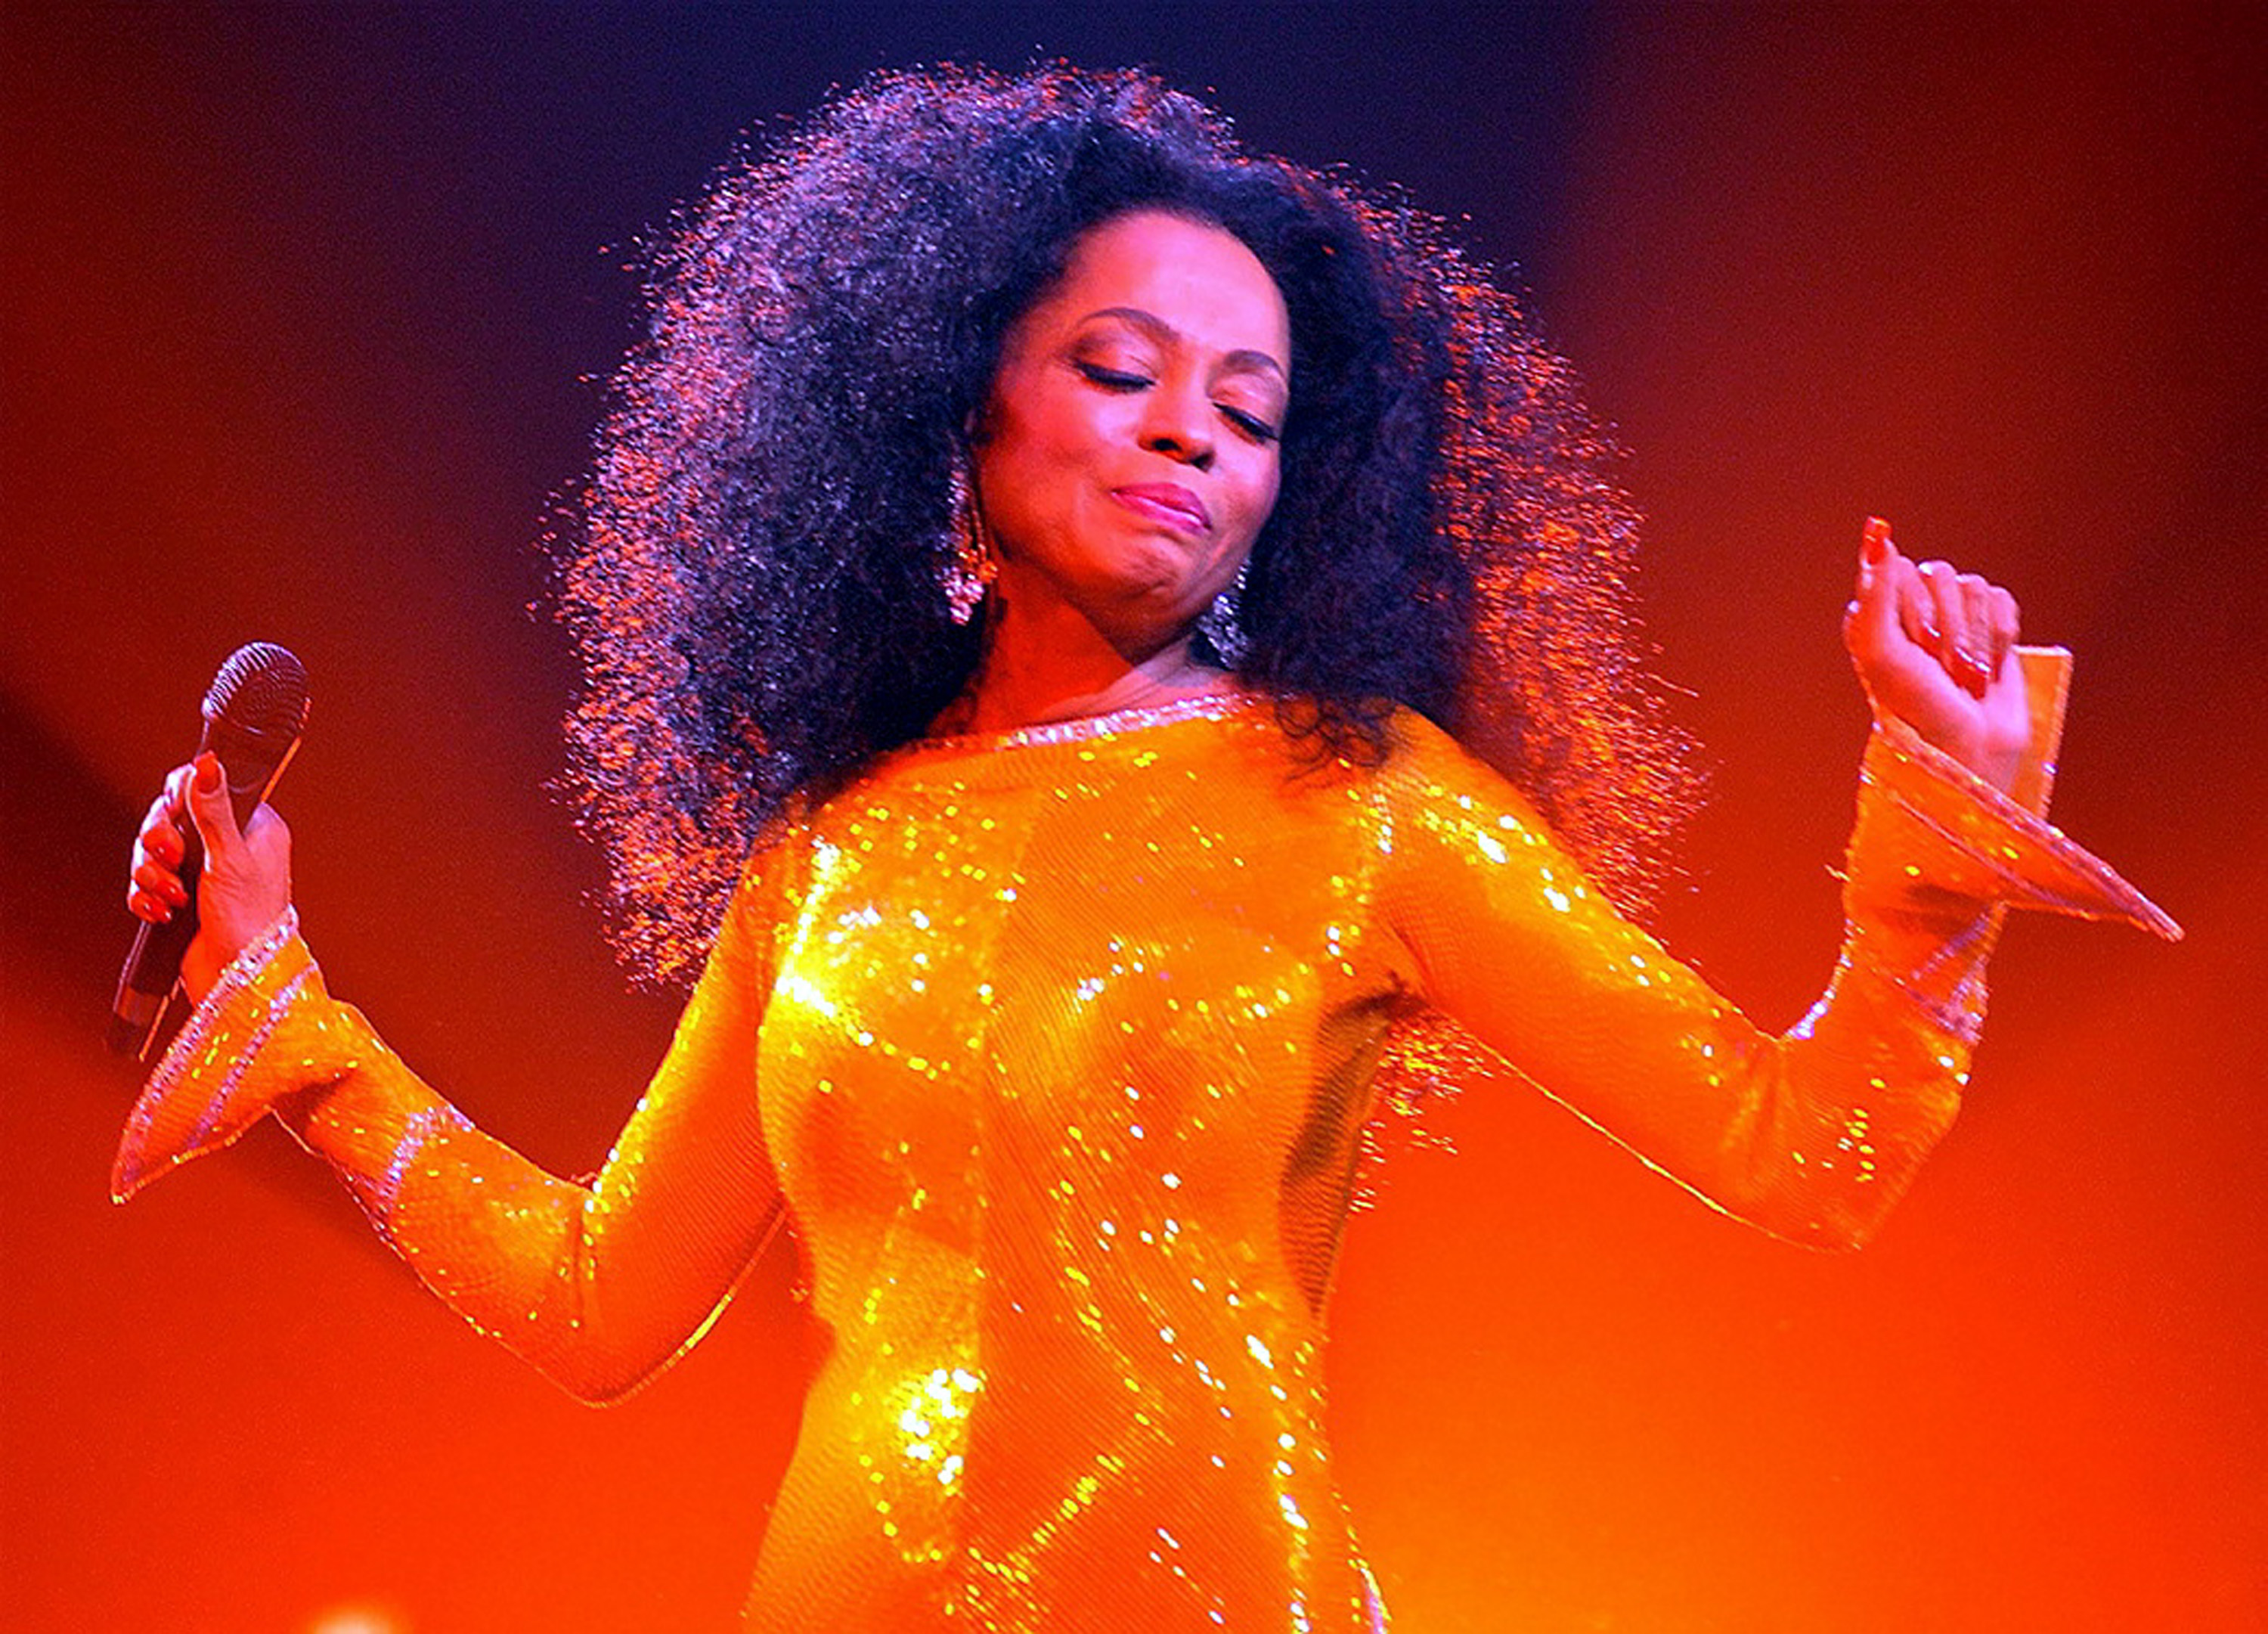 Diana Ross performs at The Point Theatre on March 10, 2004 in Dublin, Ireland.